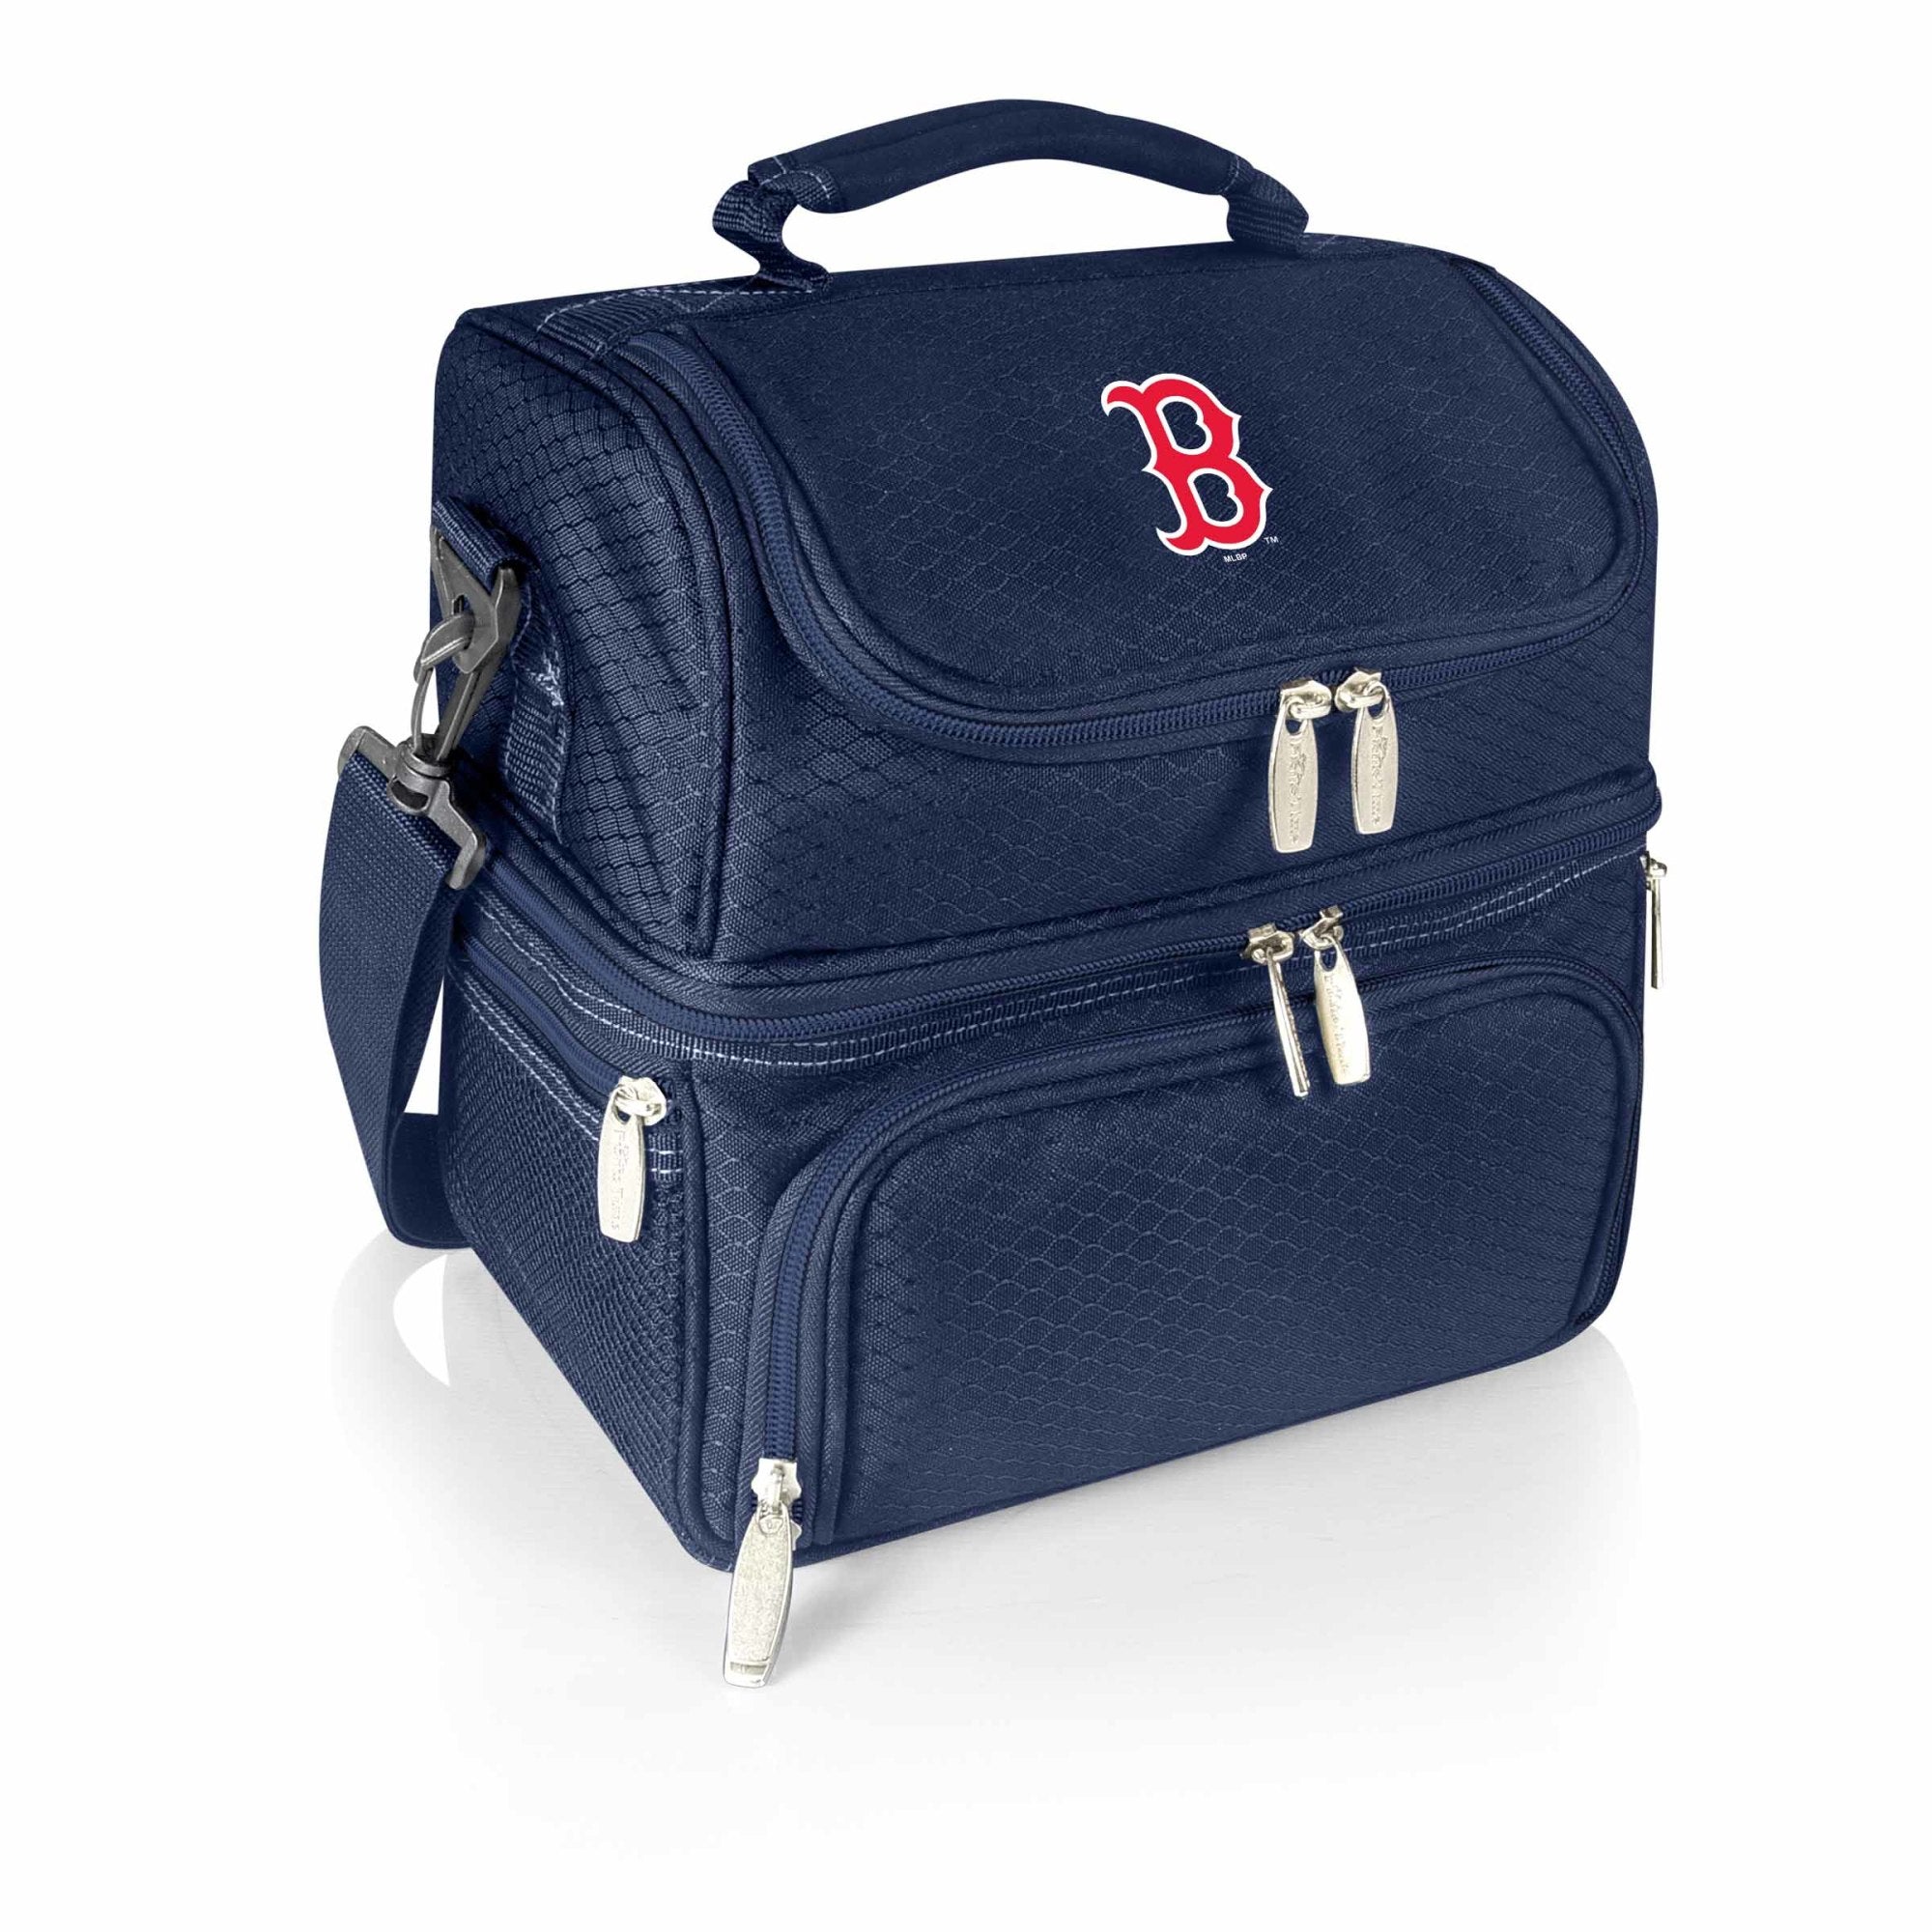 Boston Red Sox - Pranzo Lunch Bag Cooler with Utensils